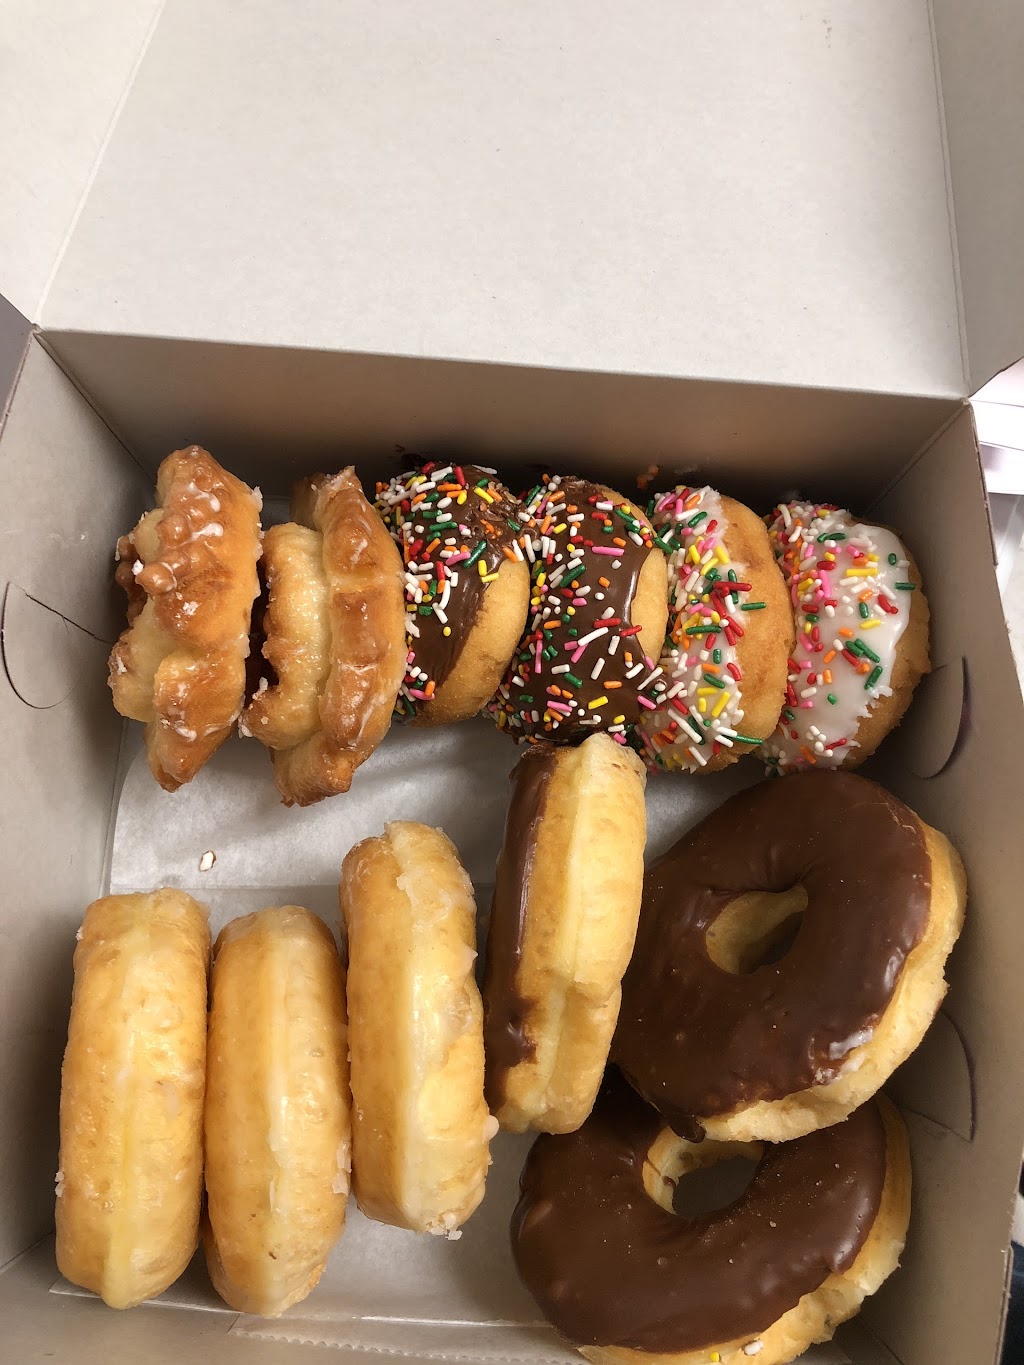 Giant Donuts | Cypress Shopping Center, 2059 Main St, Oakley, CA 94561 | Phone: (925) 625-2324